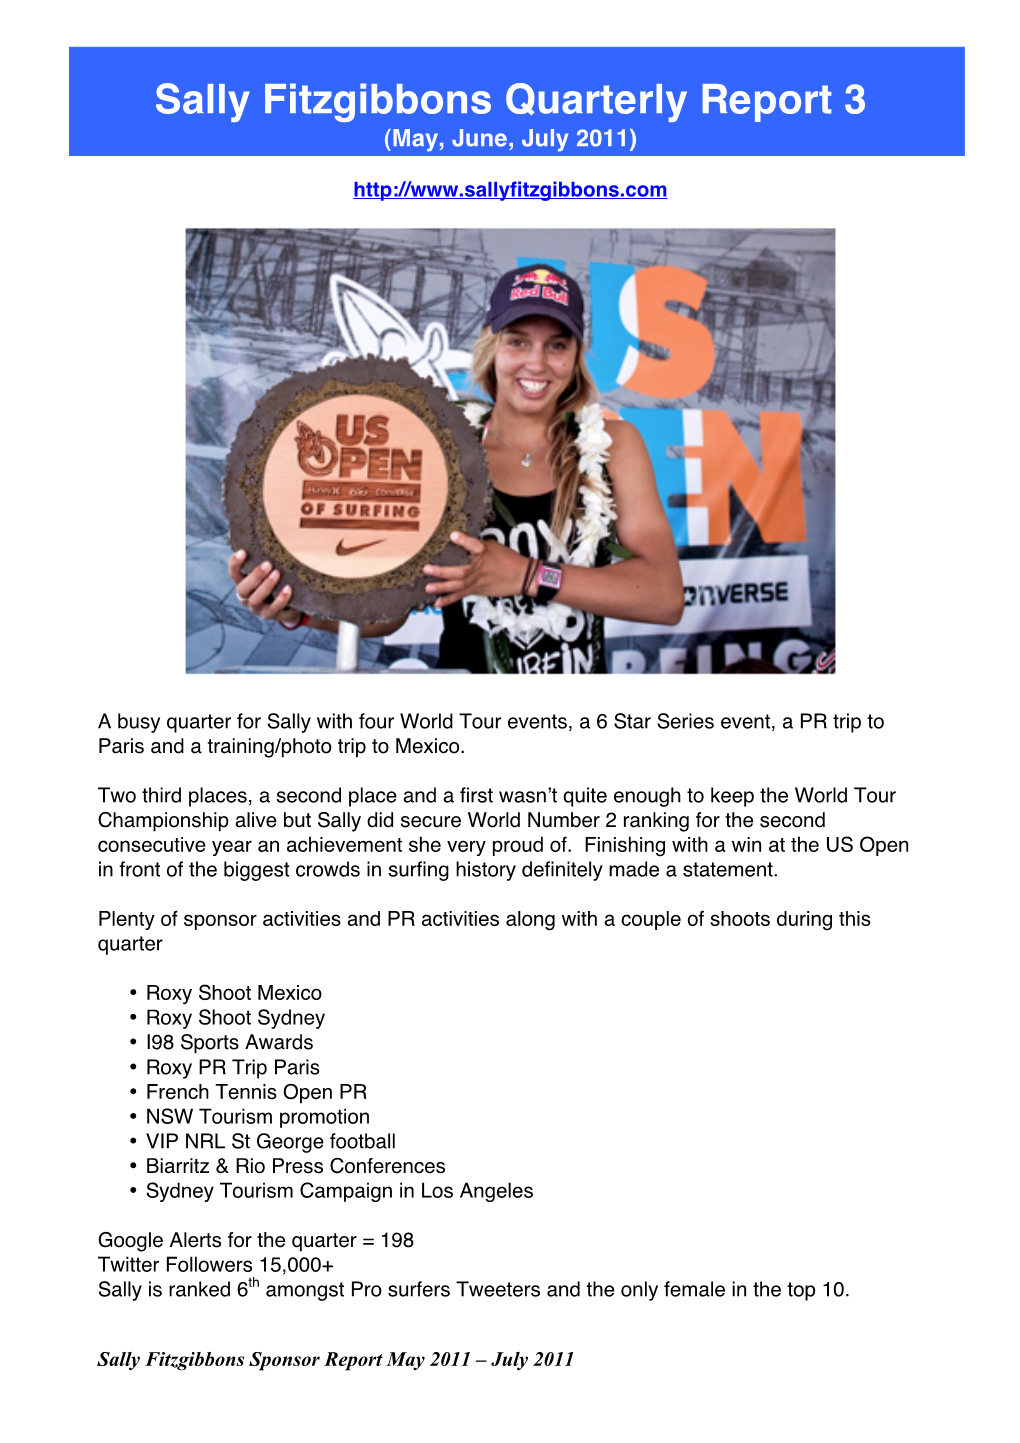 Sally Fitzgibbons 3Rd Quarterly Report 2011